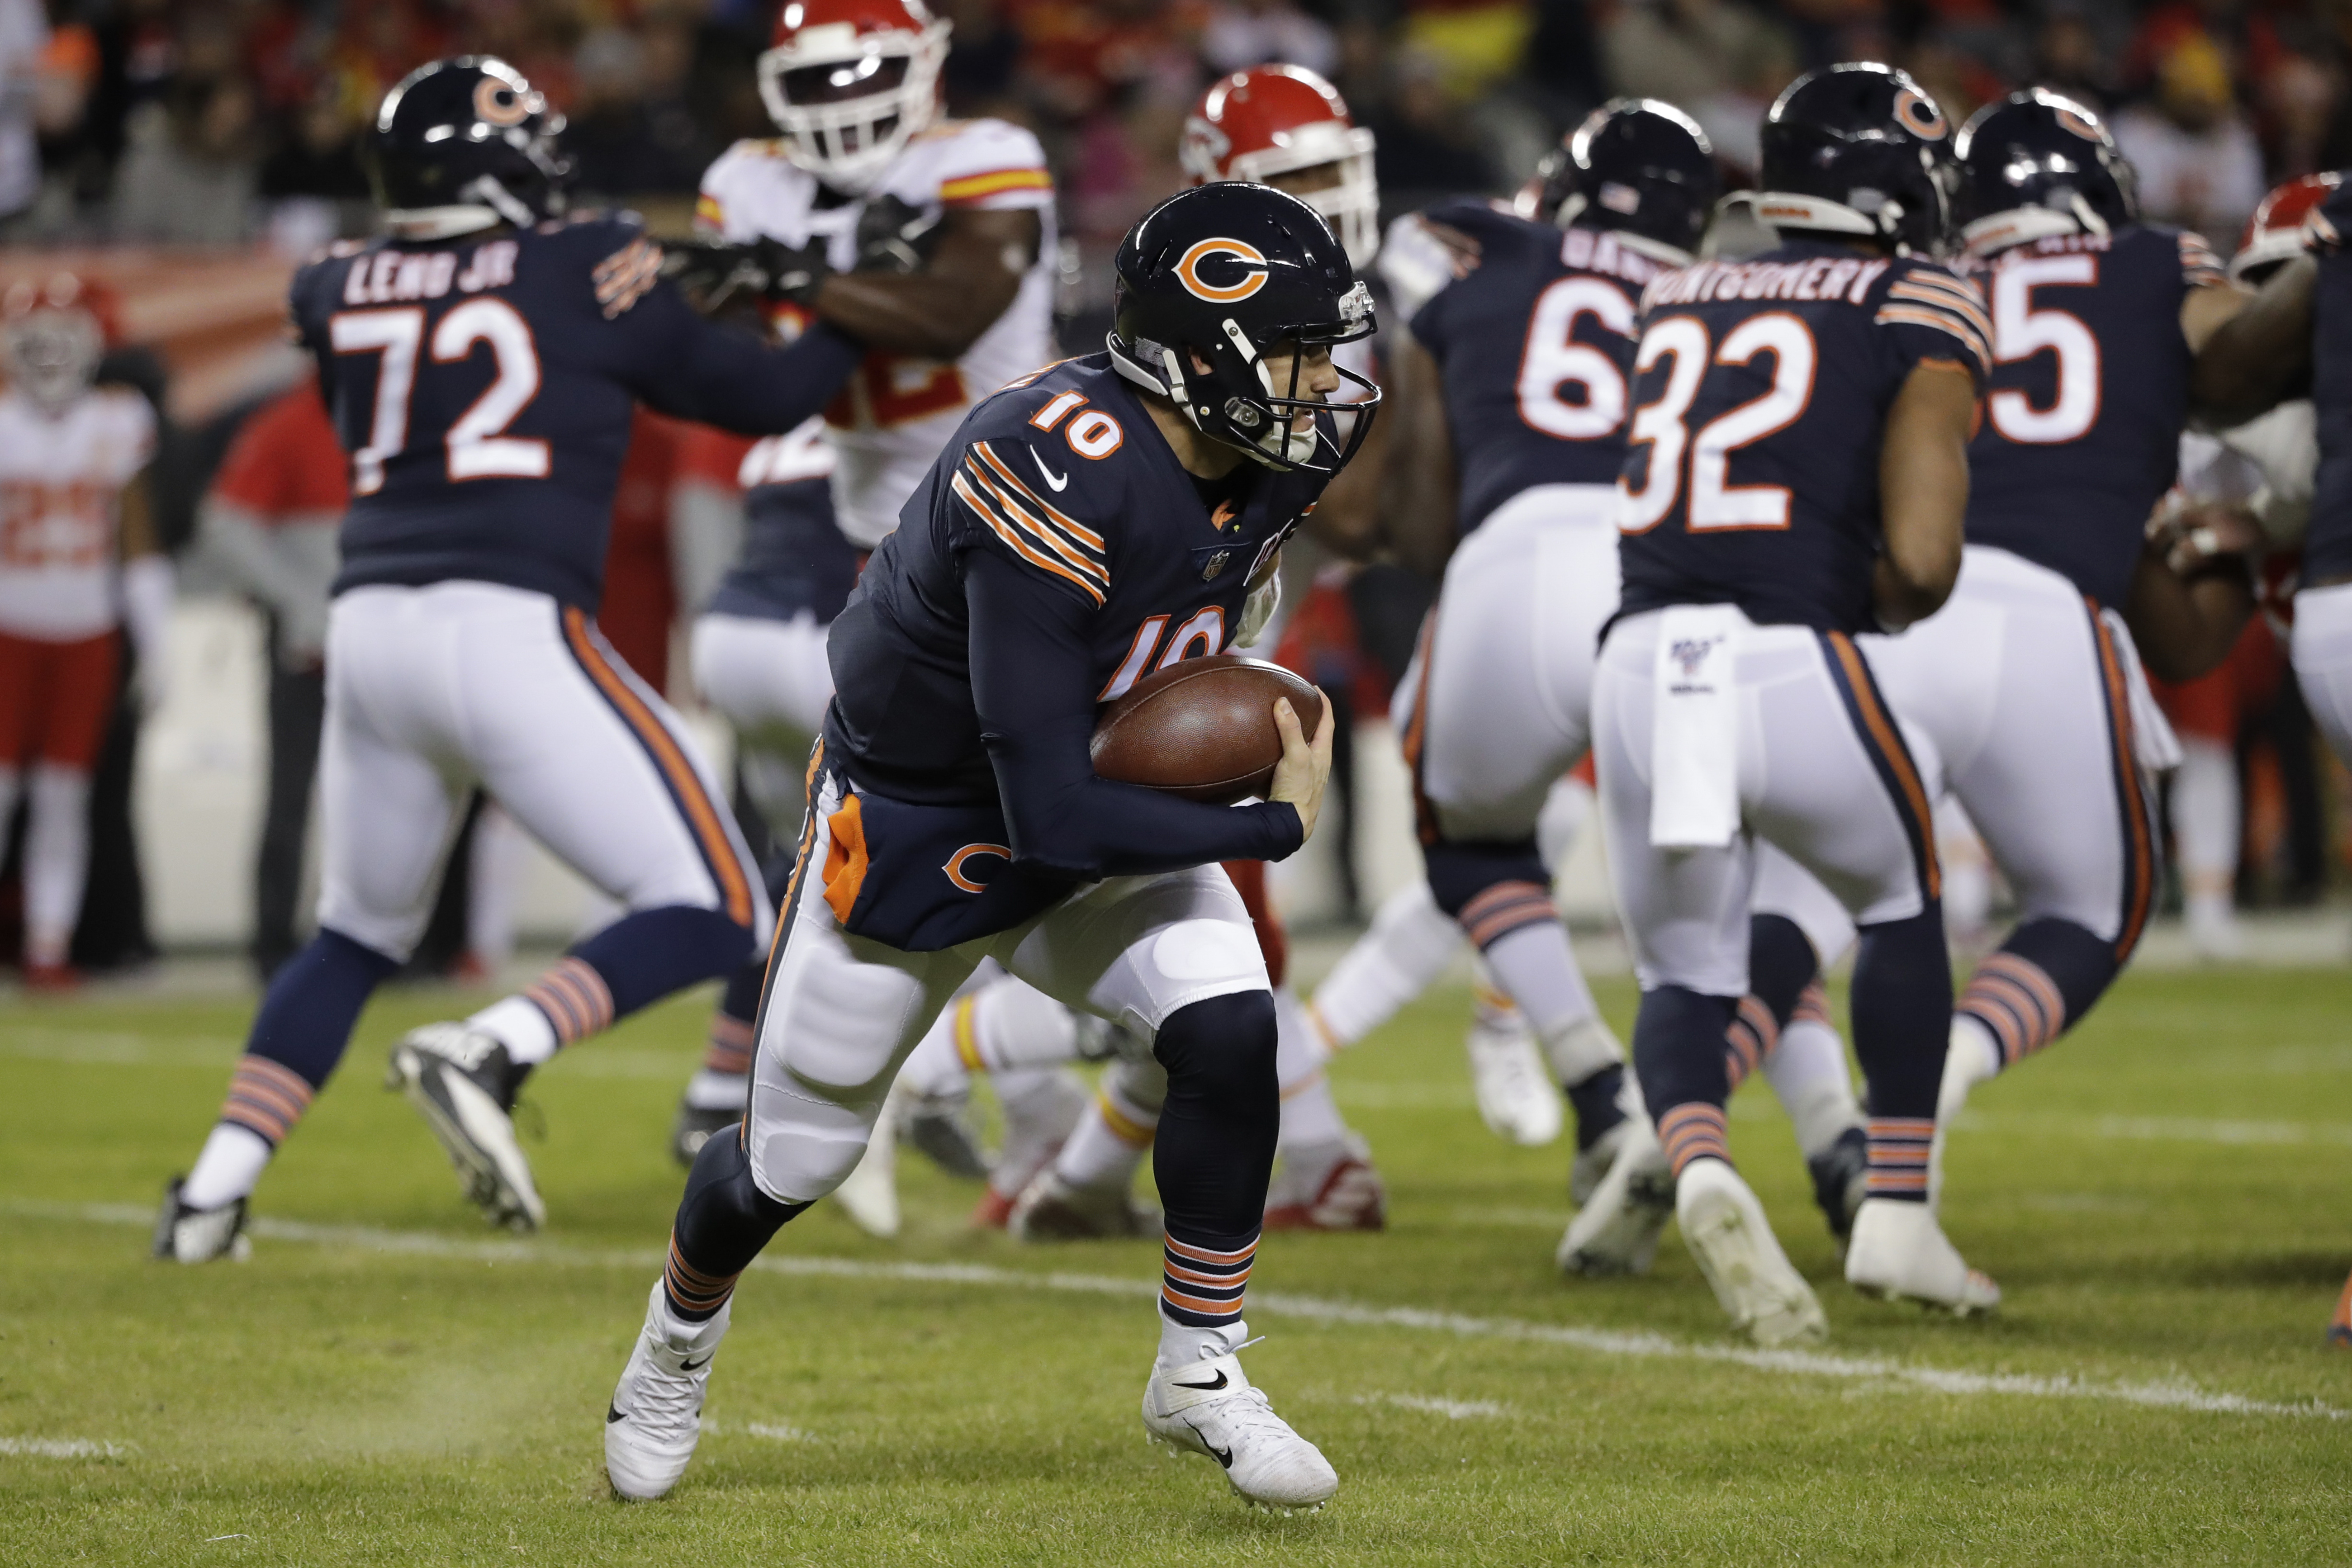 Bears have plenty to fix as disappointing season winds down